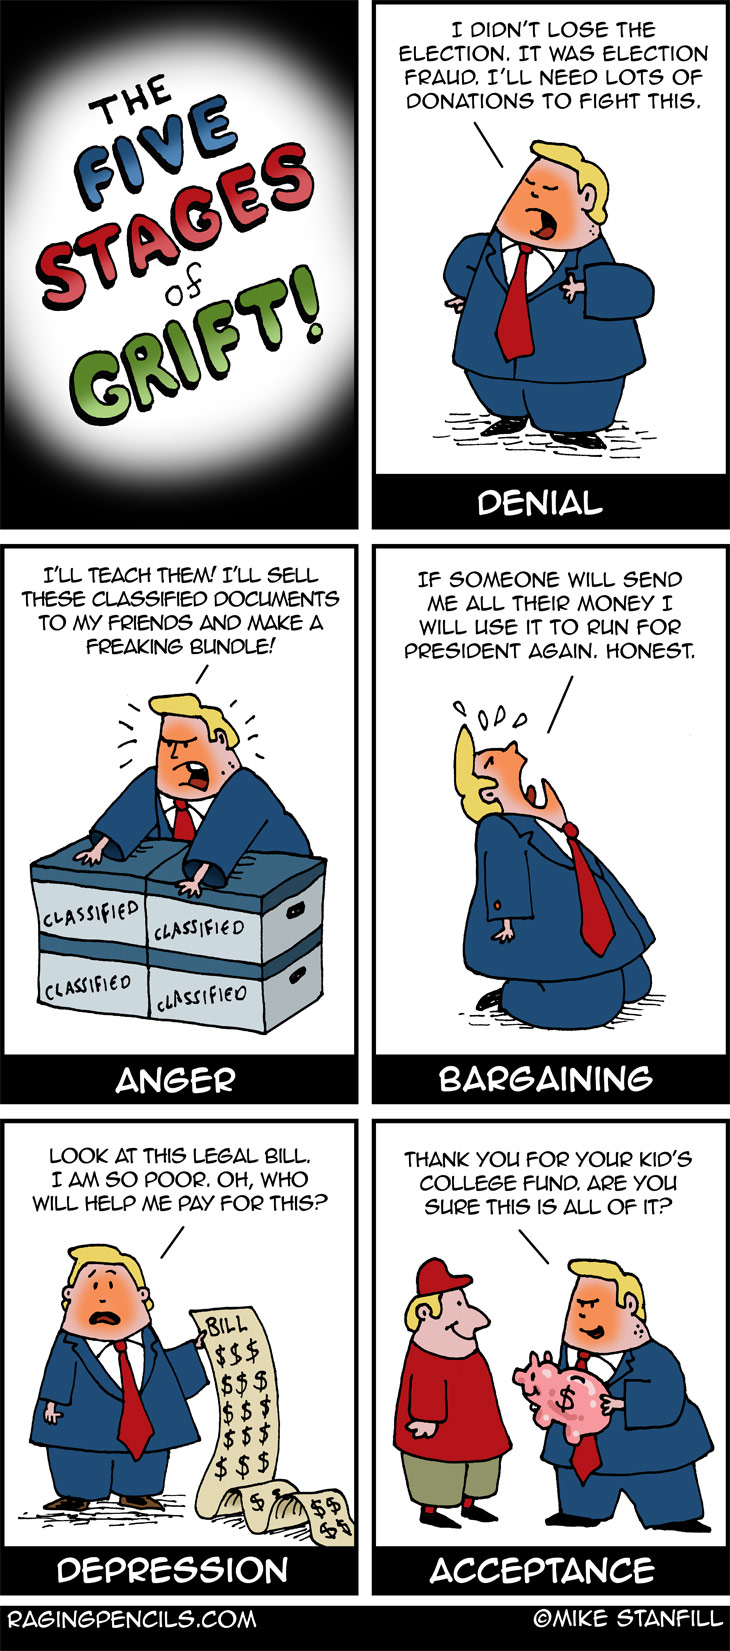 The progressive comic about Trump the grifter.